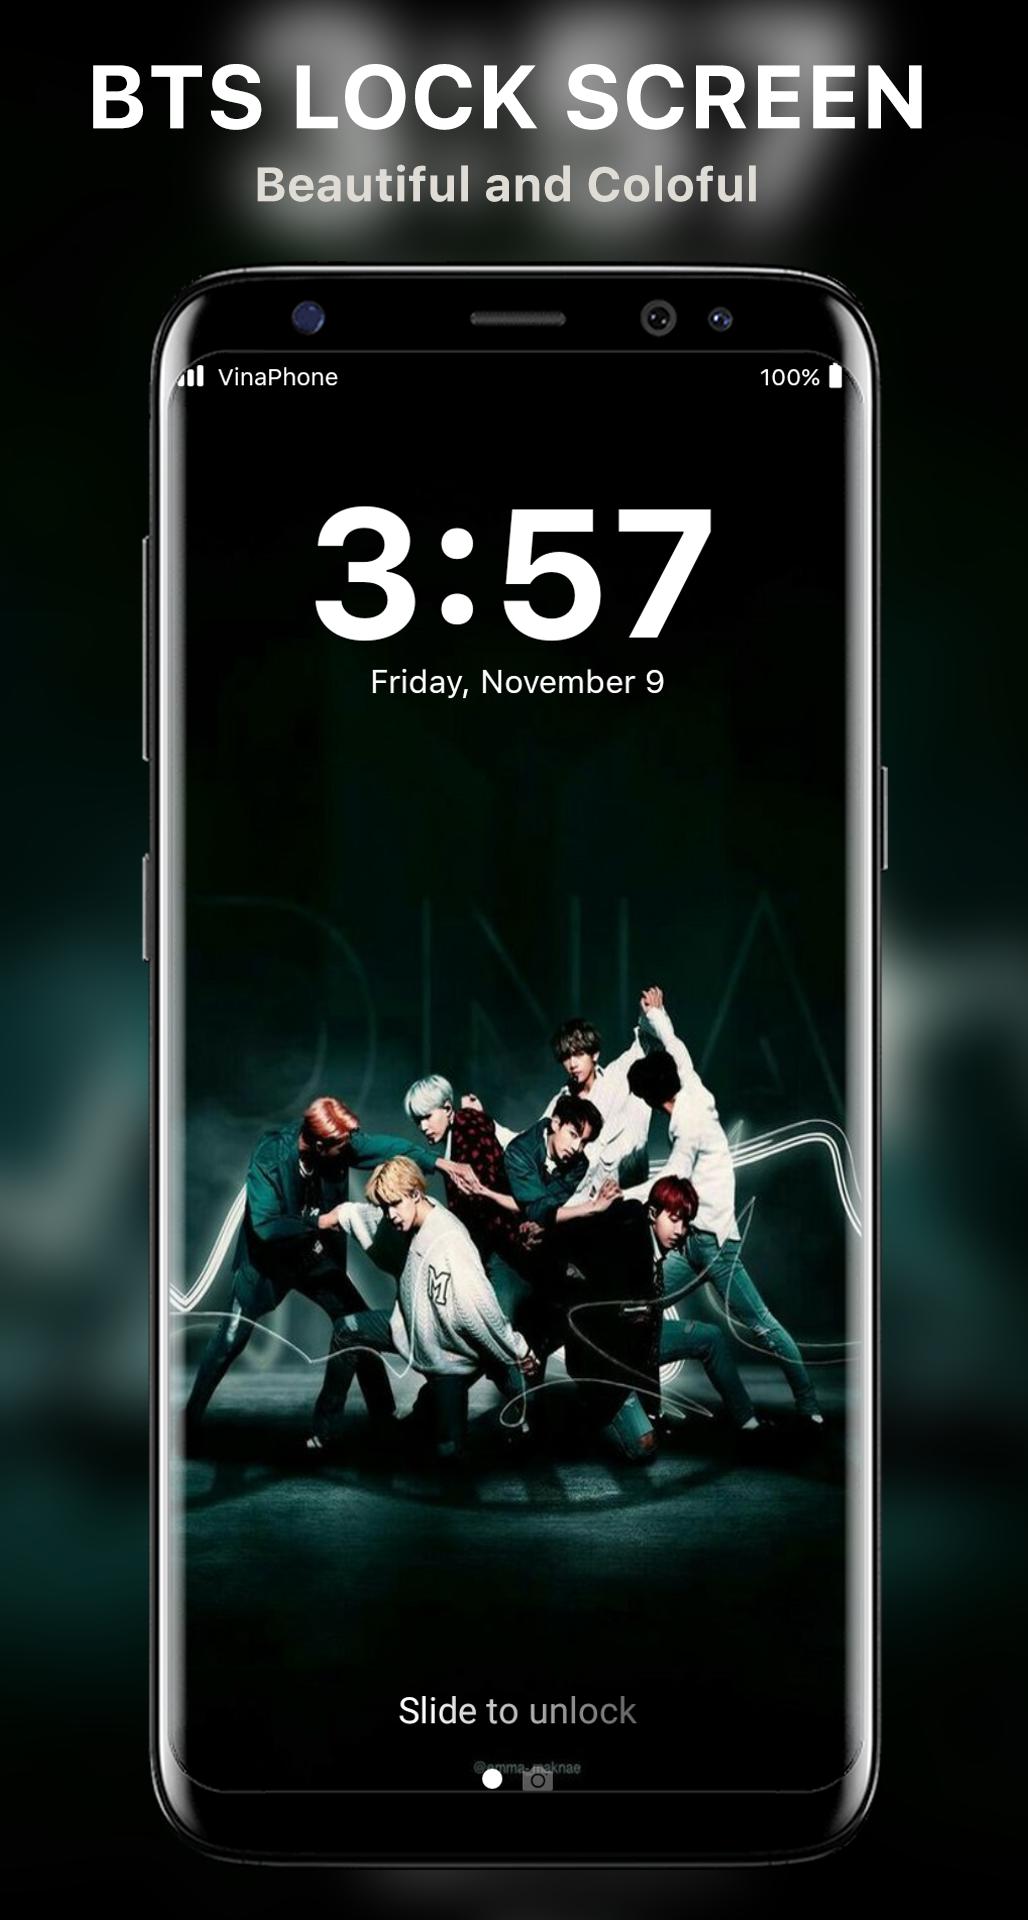 Bts Keypad Lock Screen Bts Wallpaper For Android Apk Download - download mp3 bts song fire code for roblox 2018 free